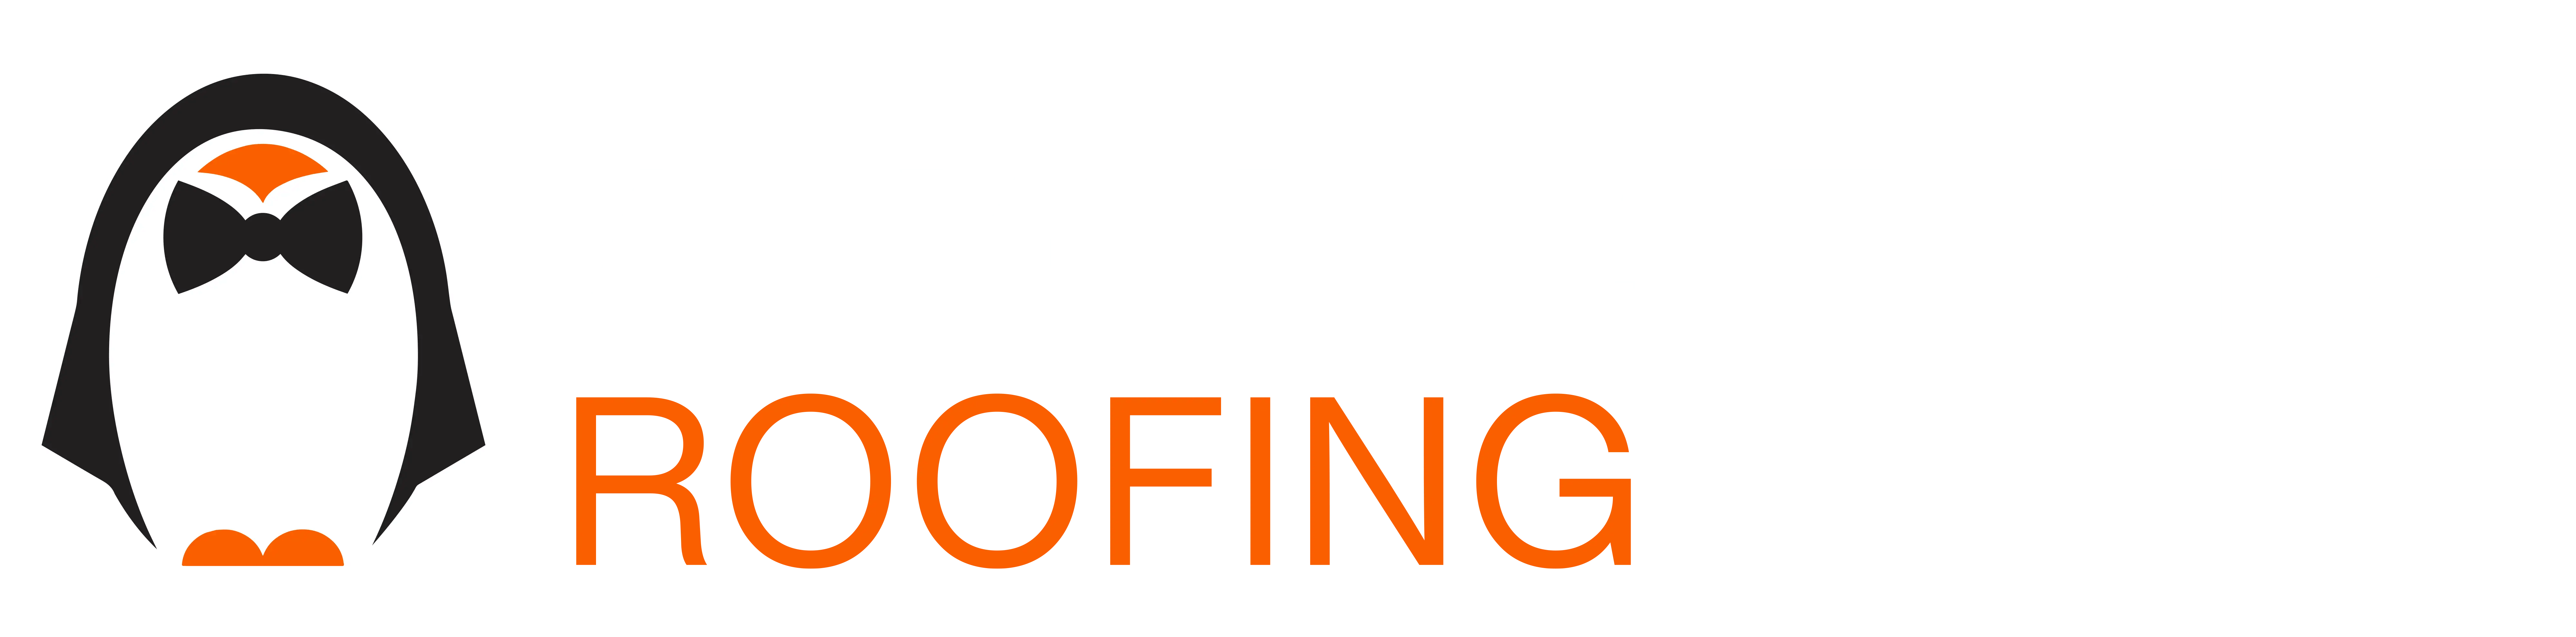 At Your Service Roofing: Local Roofers Greater Cincinnati Area